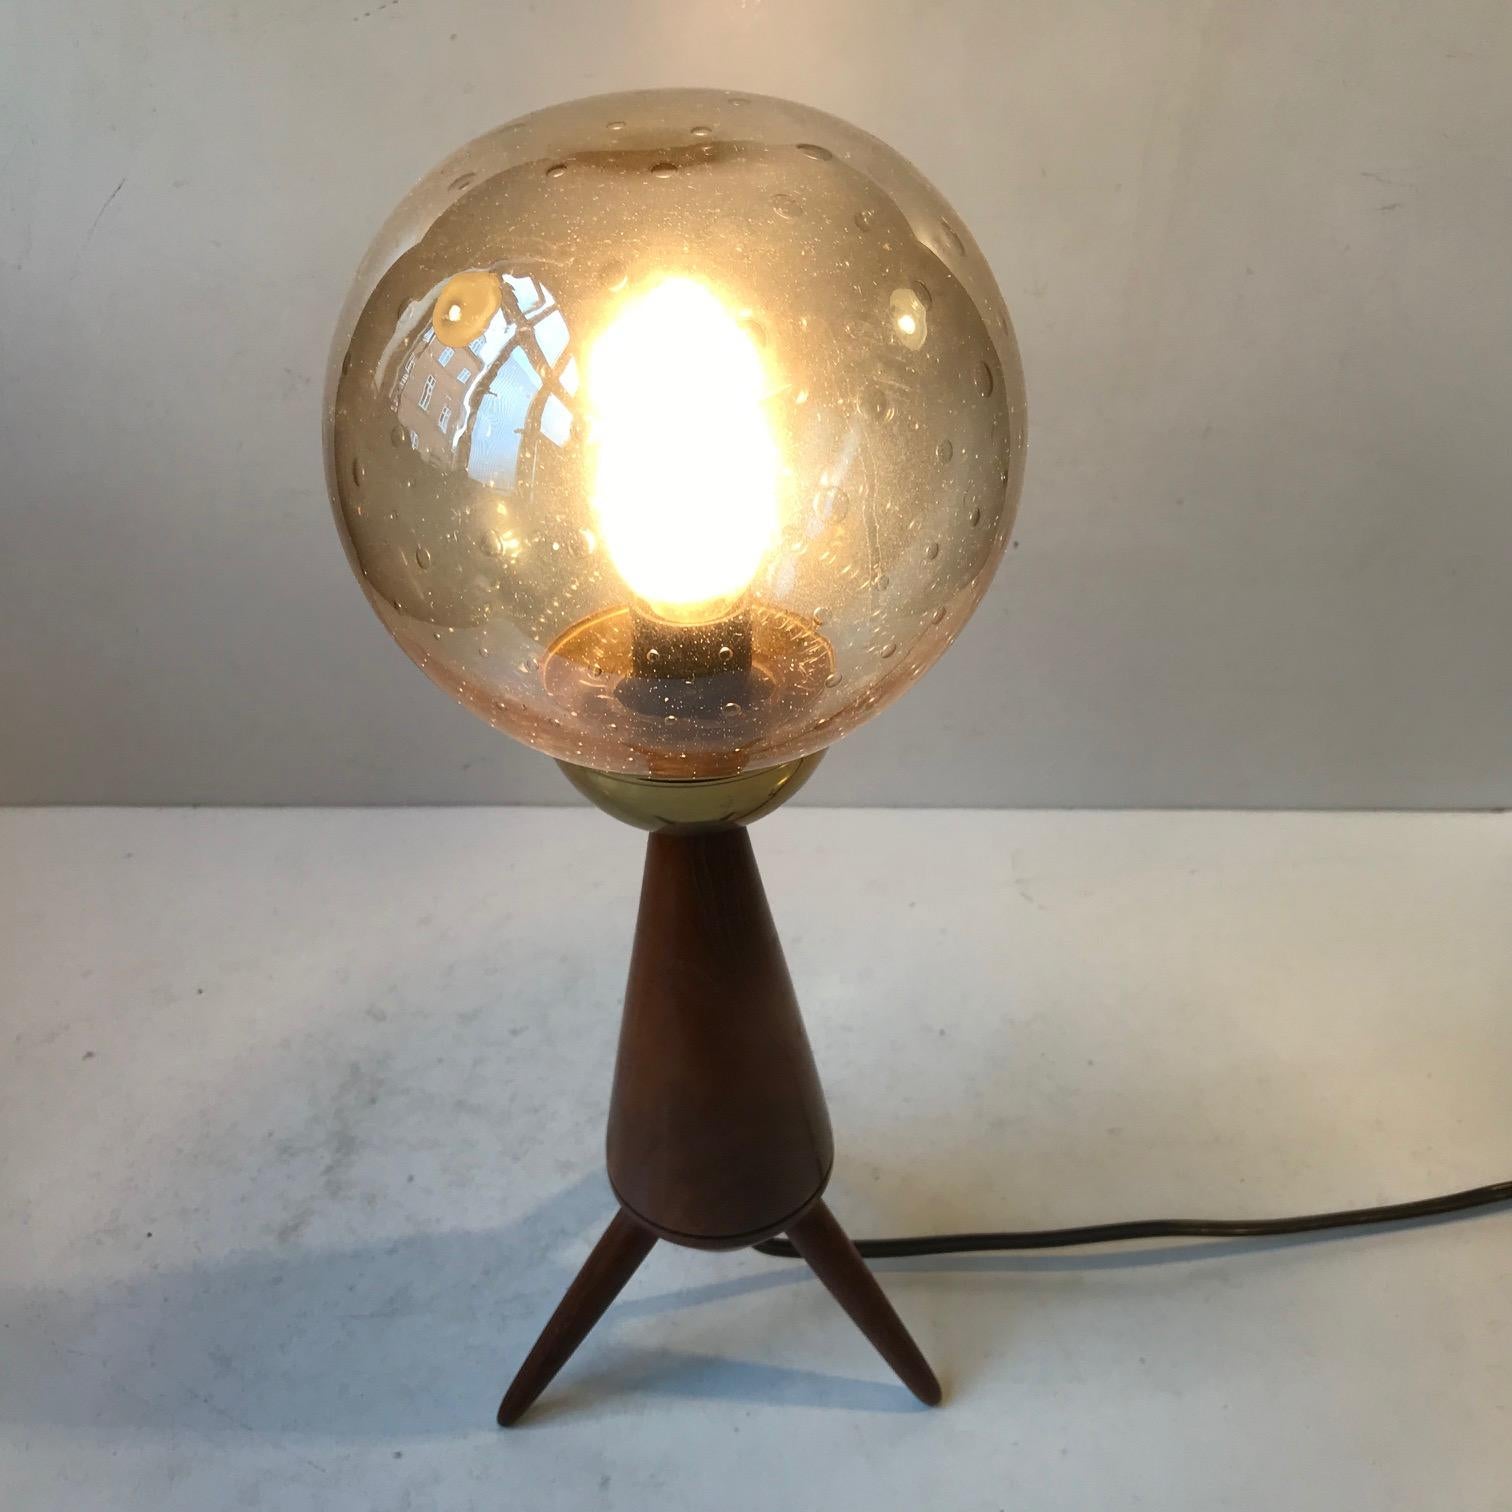 Scandinavian Midcentury Tripod Table Lamp in Teak and Glass, 1960s For Sale 1